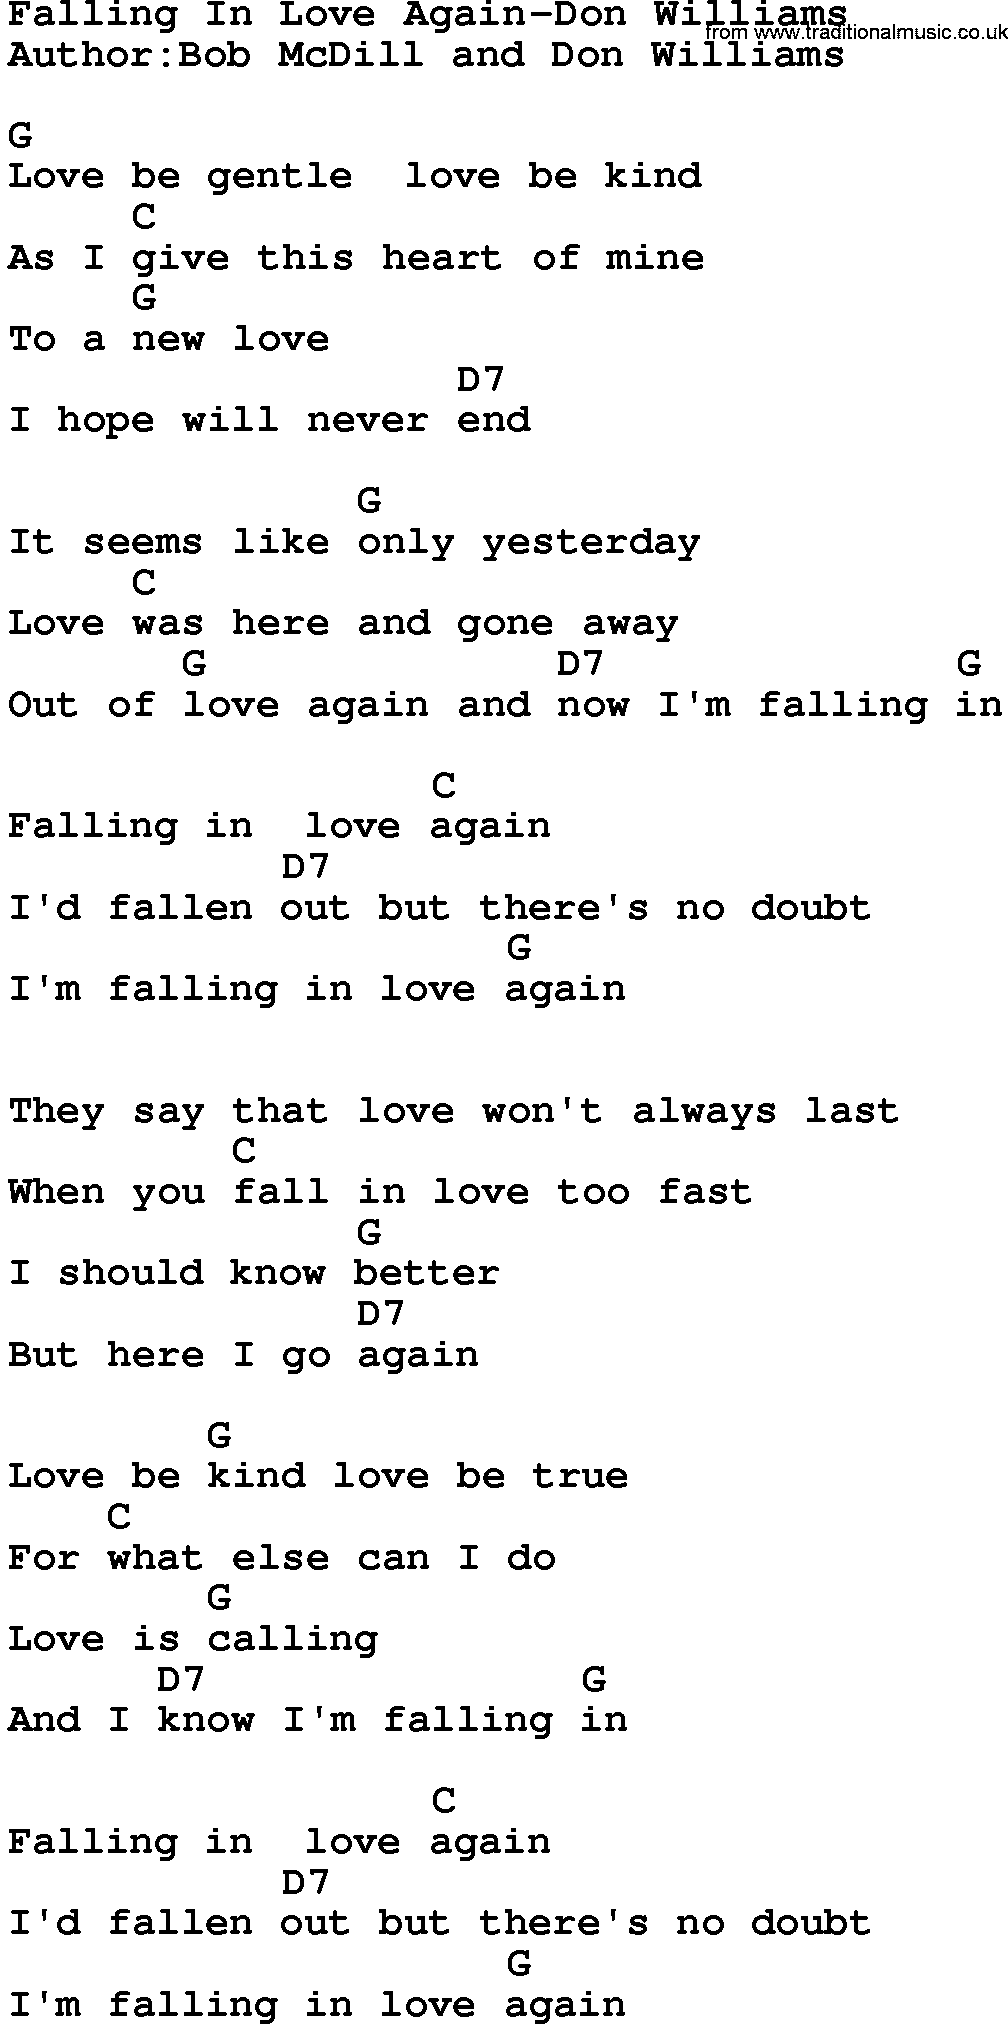 Country music song: Falling In Love Again -Don Williams lyrics and chords